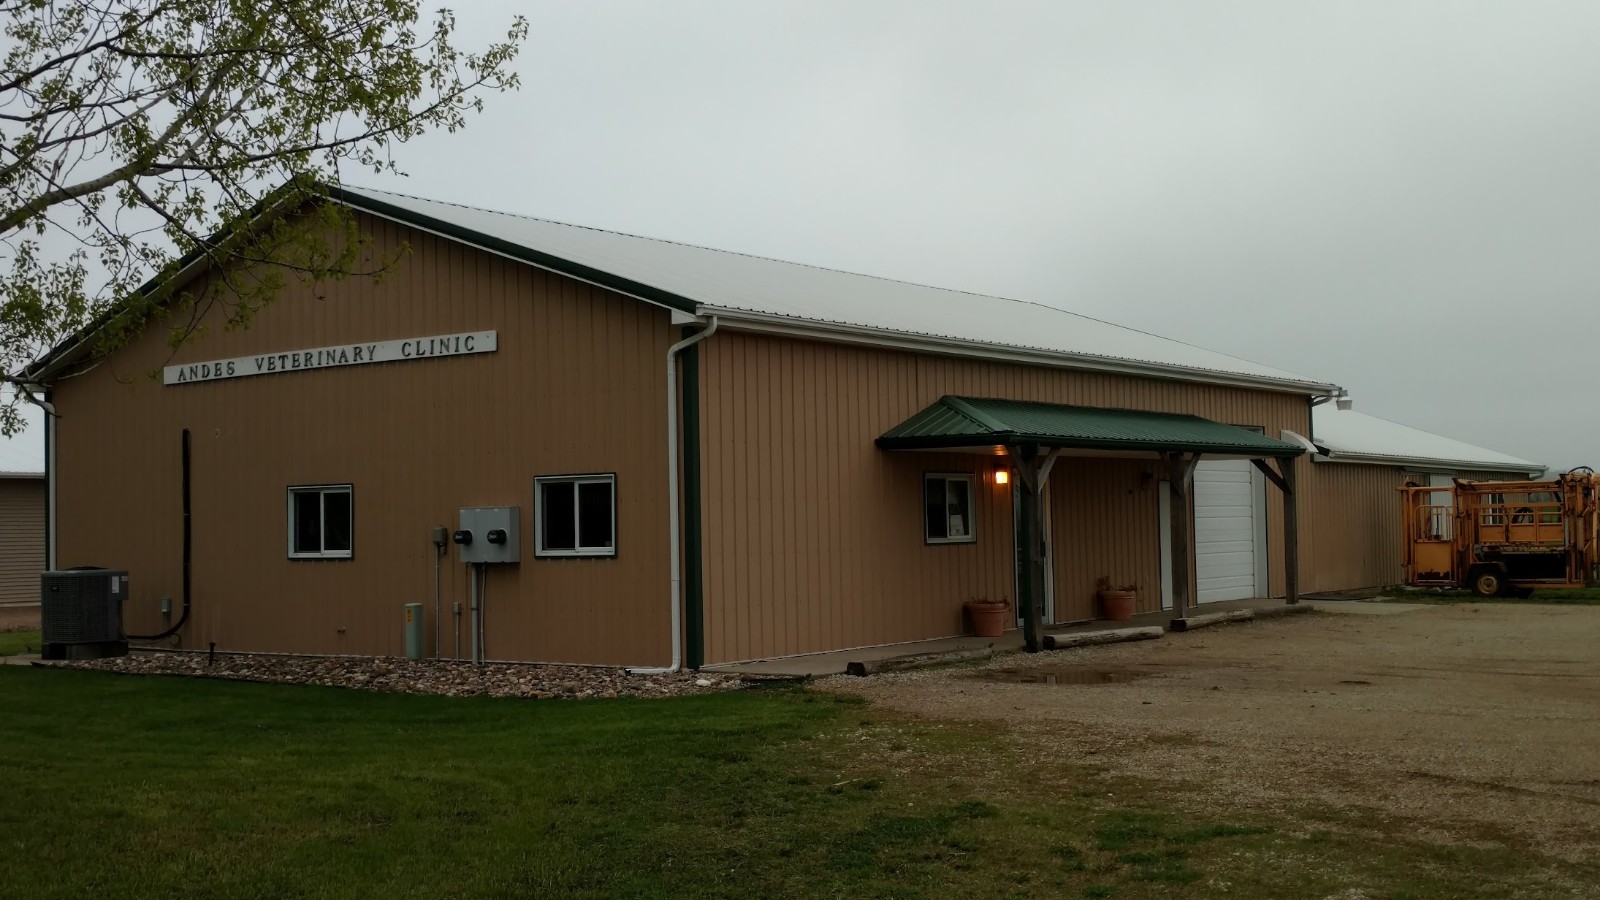 Andes Veterinary Clinic 625 SD-50, Lake Andes South Dakota 57356